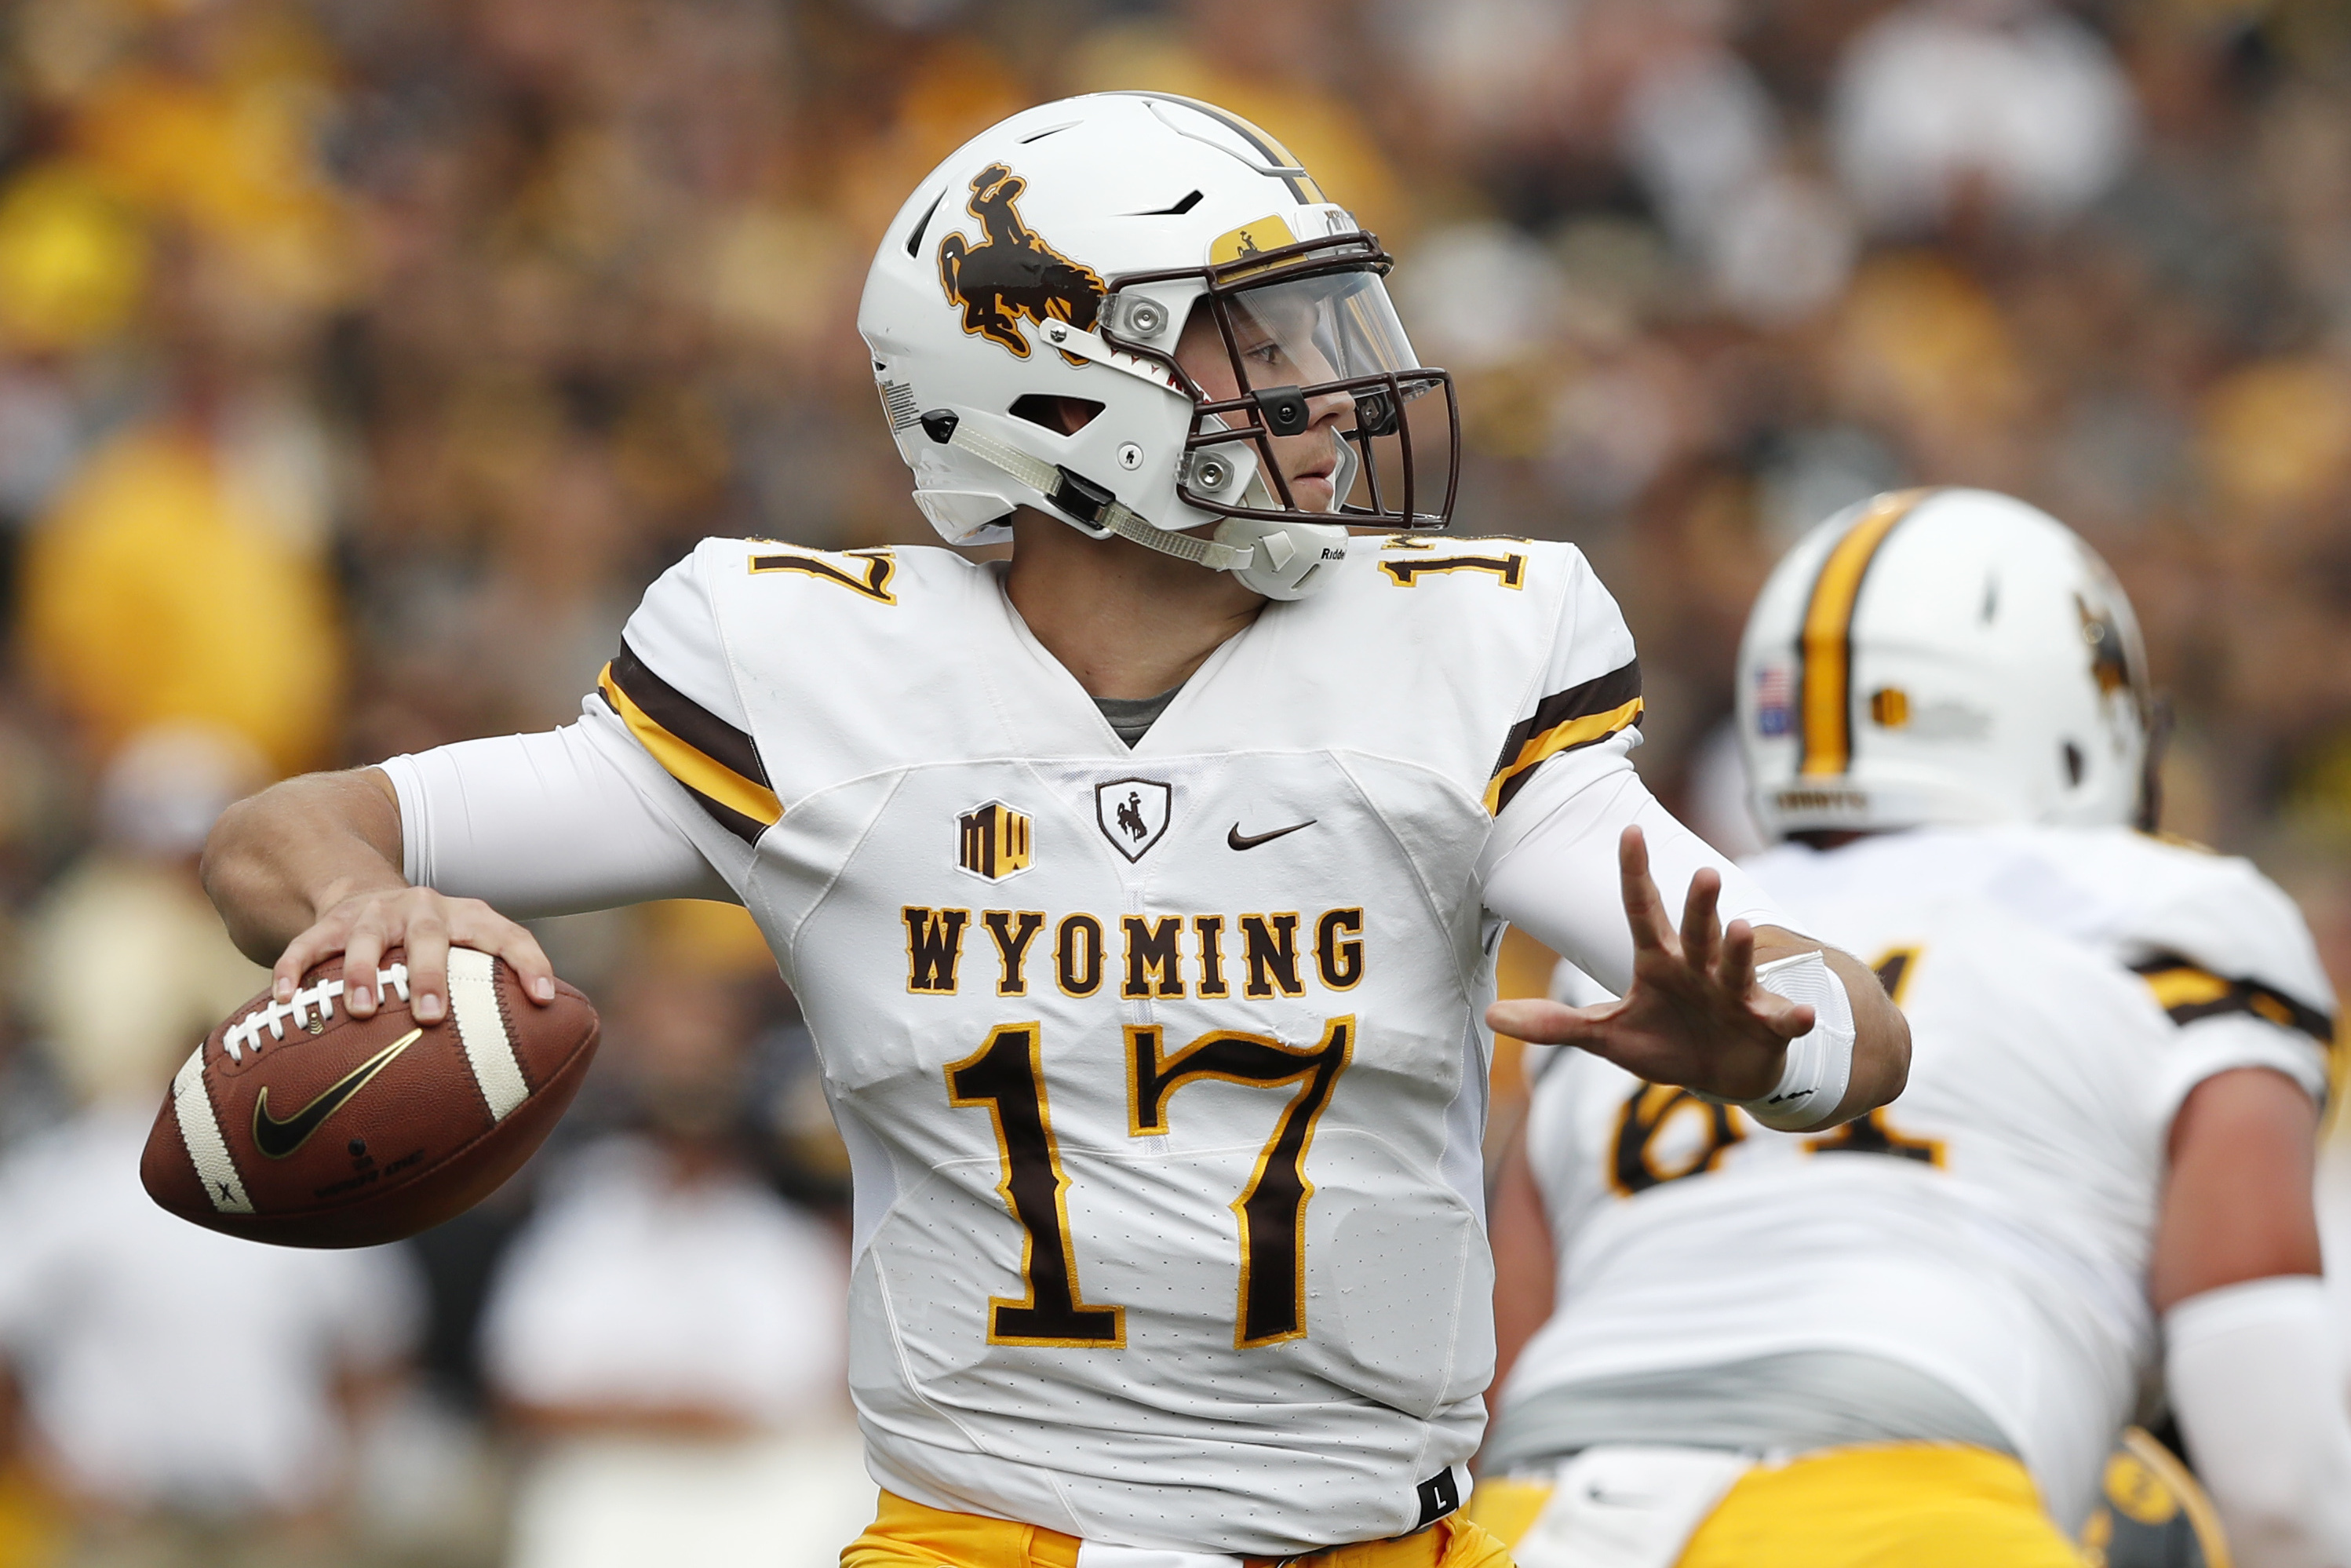 Patrick Mahomes Nudged Josh Allen During Texas Tech-Wyoming Double